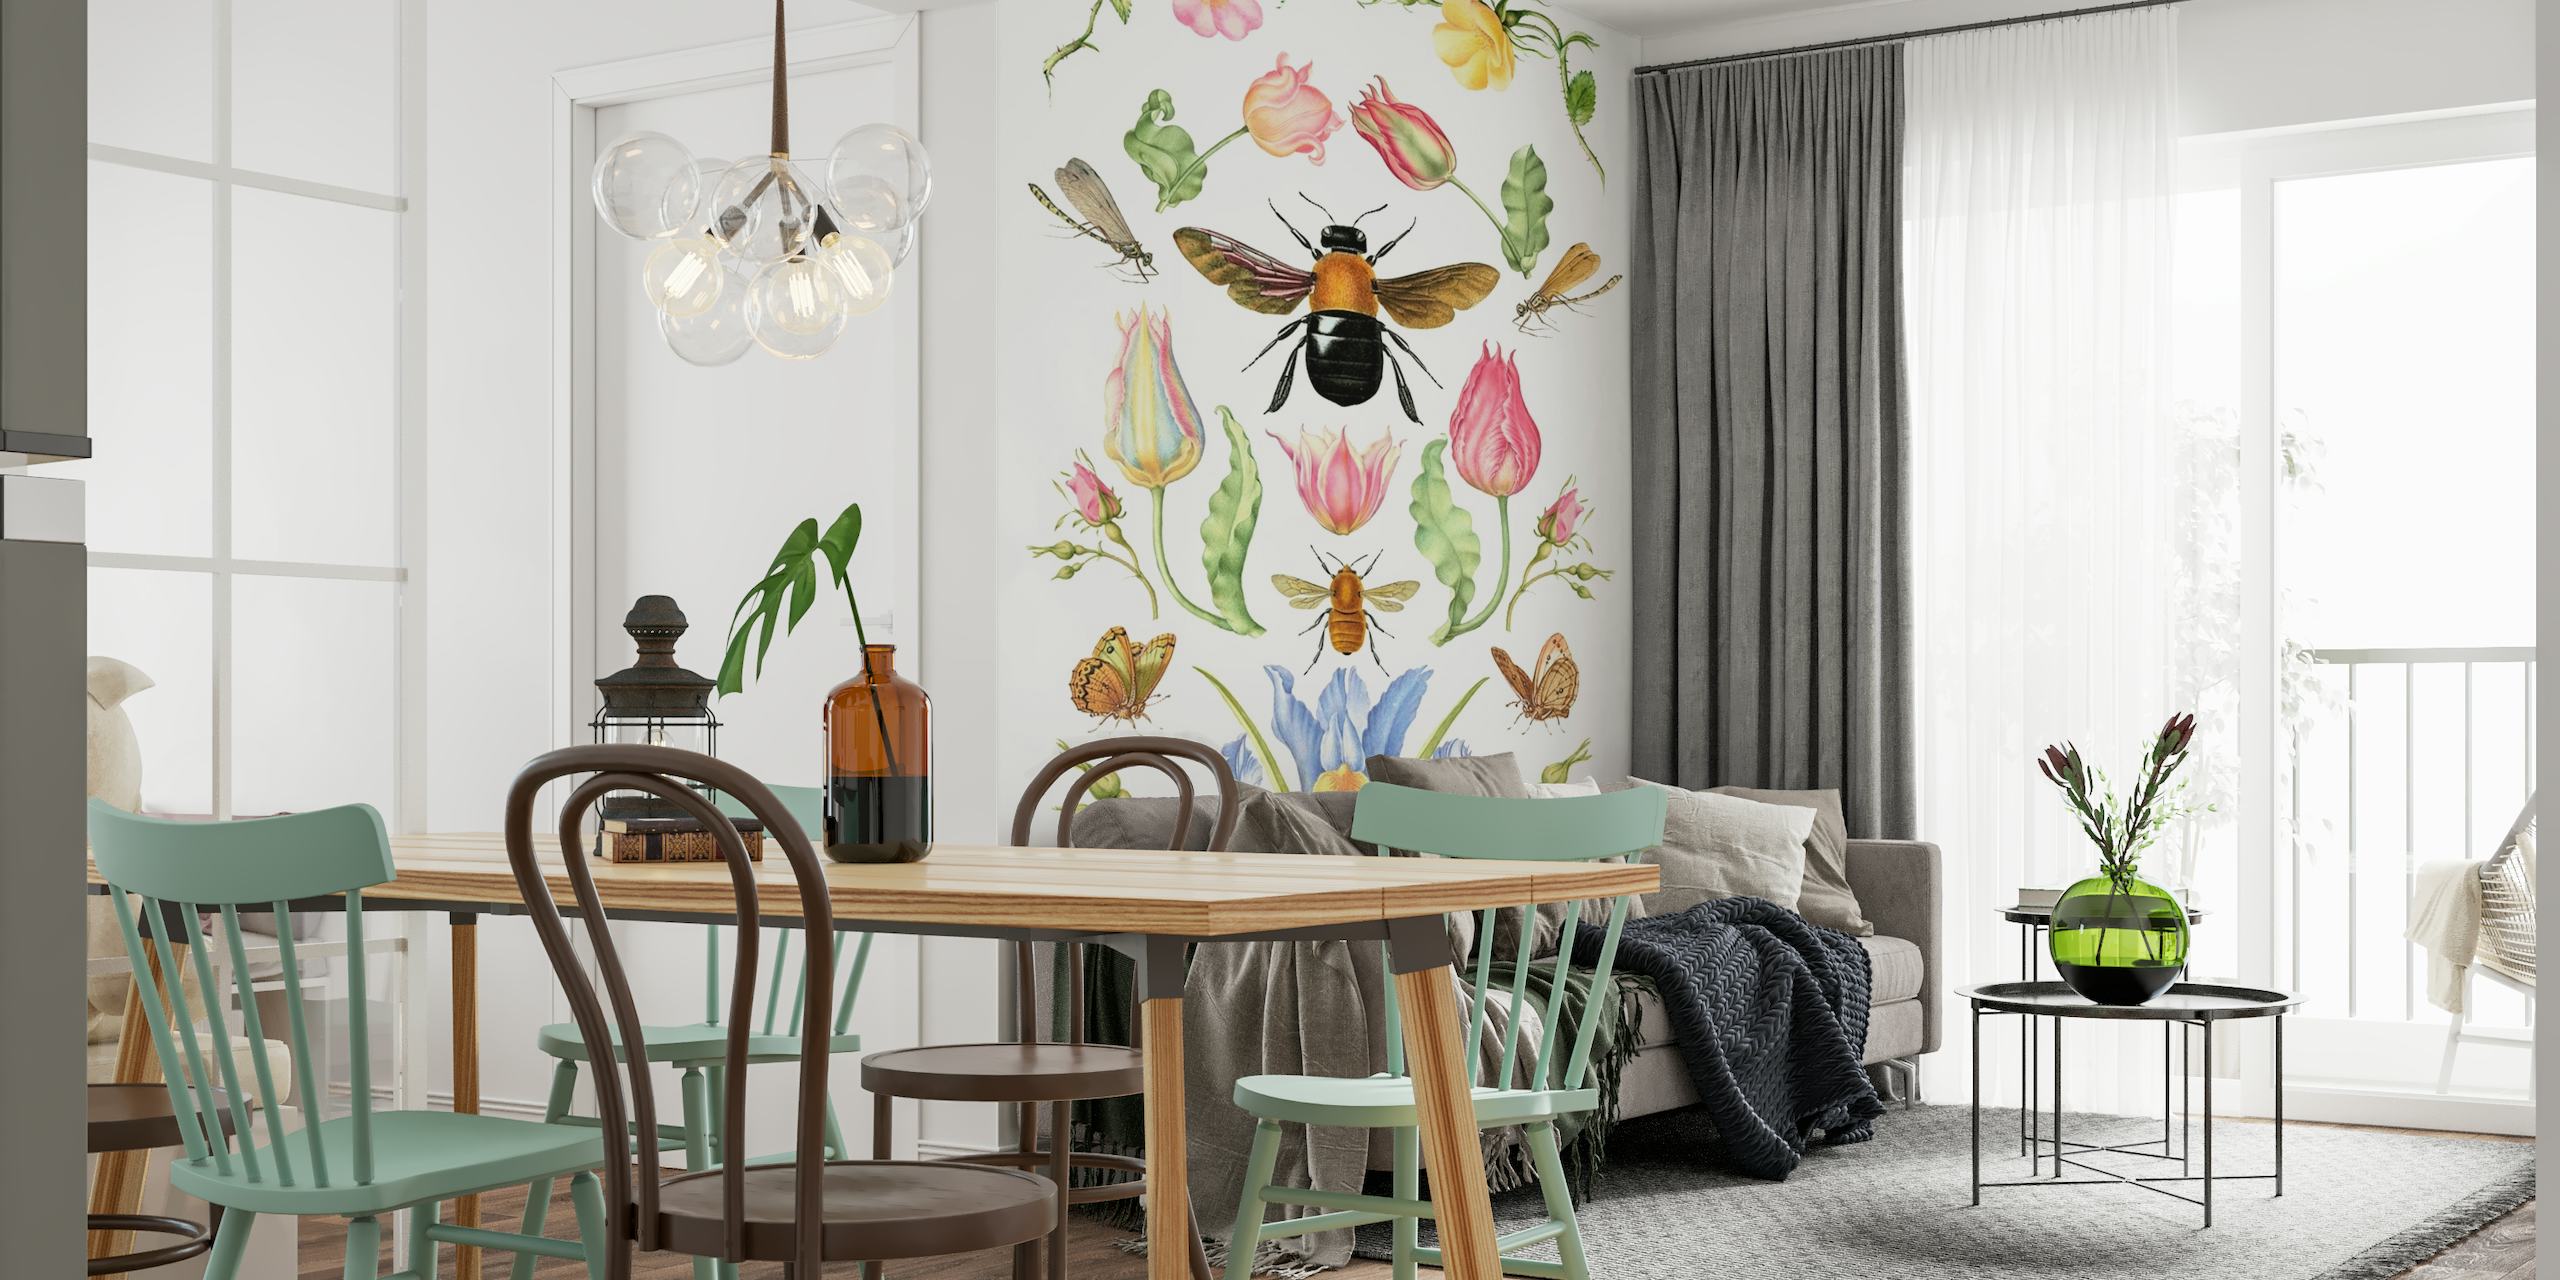 Vintage spring flowers and insects collage wall mural with pastel colors